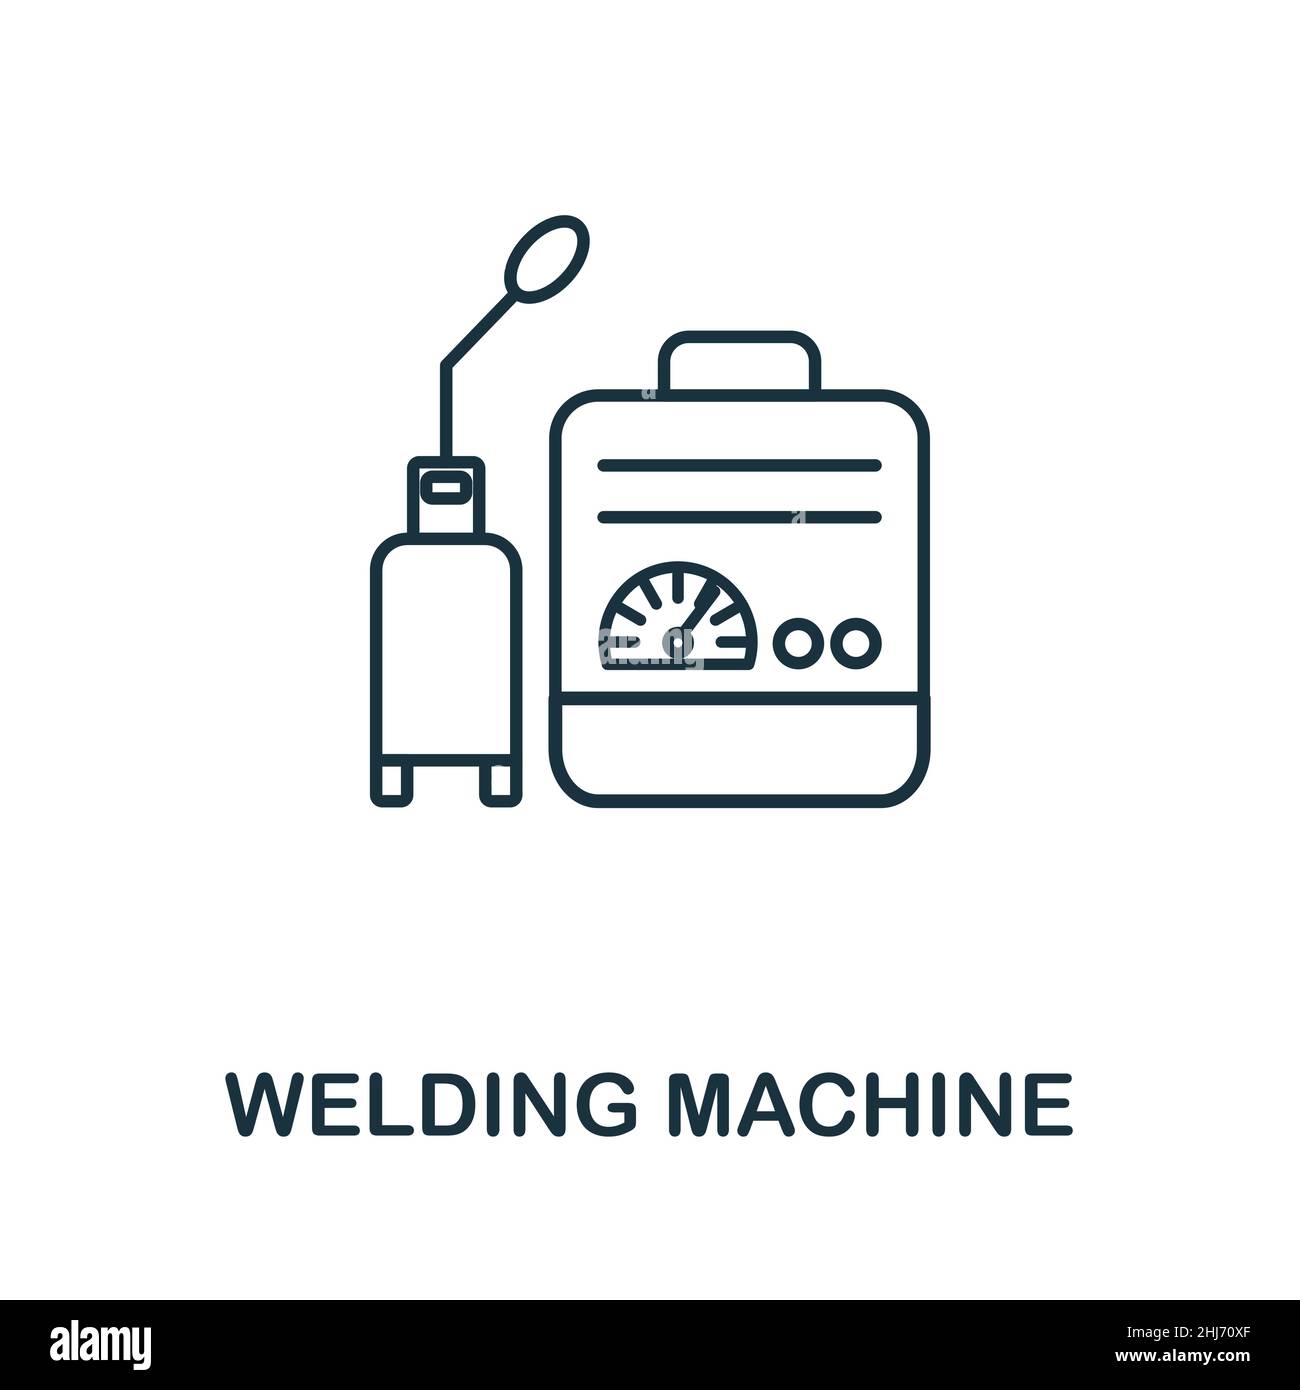 Welding Machine icon. Line element from machinery collection. Linear Welding Machine icon sign for web design, infographics and more. Stock Vector